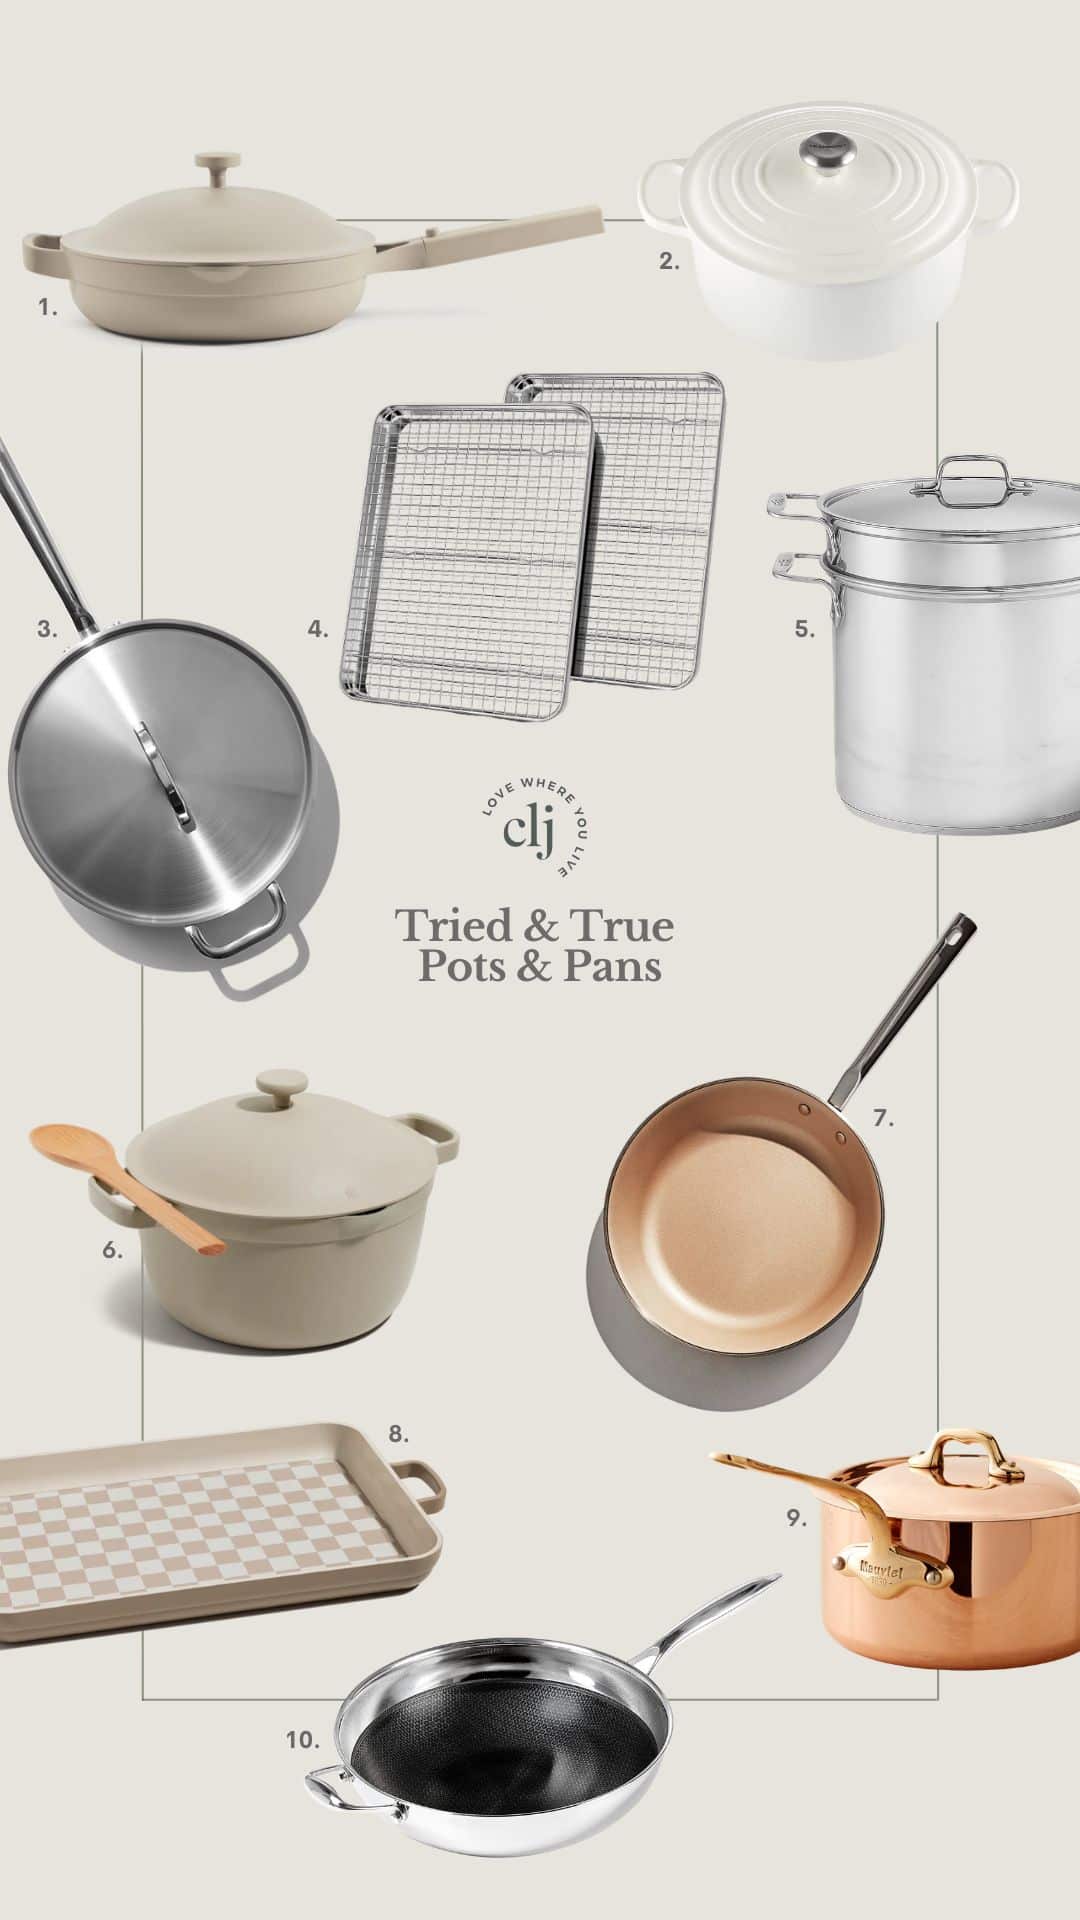 Goodful Pot and Pans Review